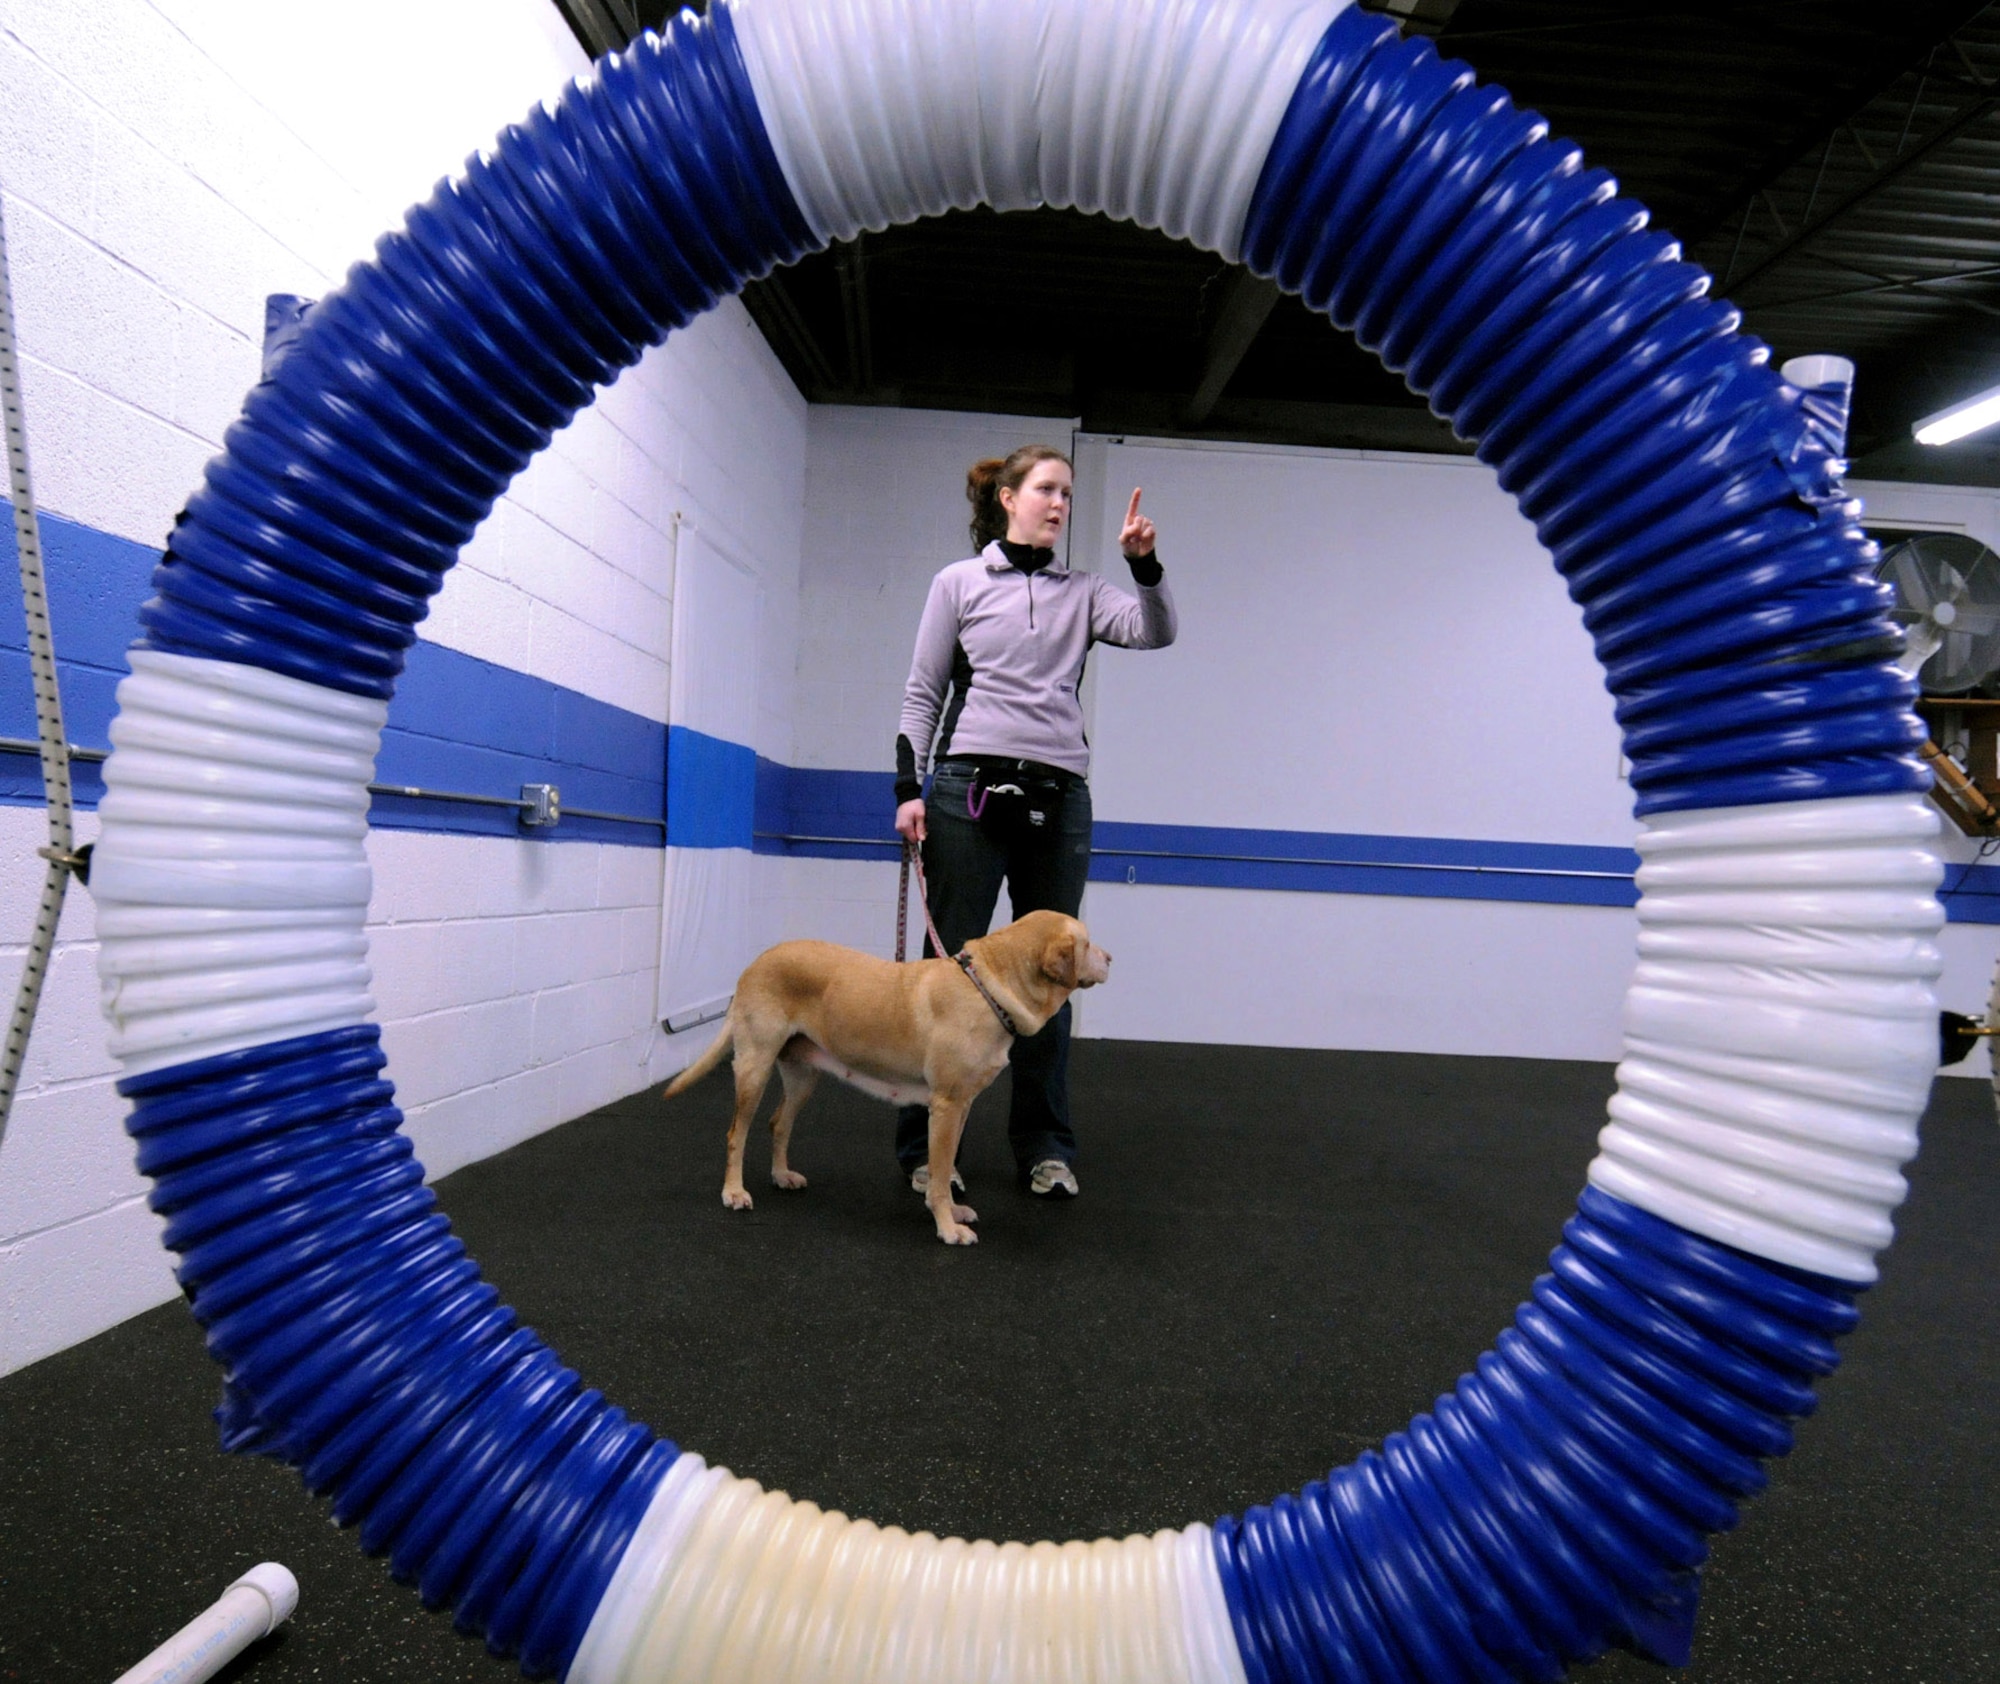 First Lt. Heather Greatting scouts out an obstacle course during agility training Feb. 11 with Zoey, her 9-year-old Labrador retriever.  The lieutenant is a space intelligence surveillance and reconnaissance systems employment analyst with the National Air and Space Intelligence Center at Wright-Patterson Air Force Base, Ohio. (U.S. Air Force photo/Staff Sgt. Joshua Strang) 